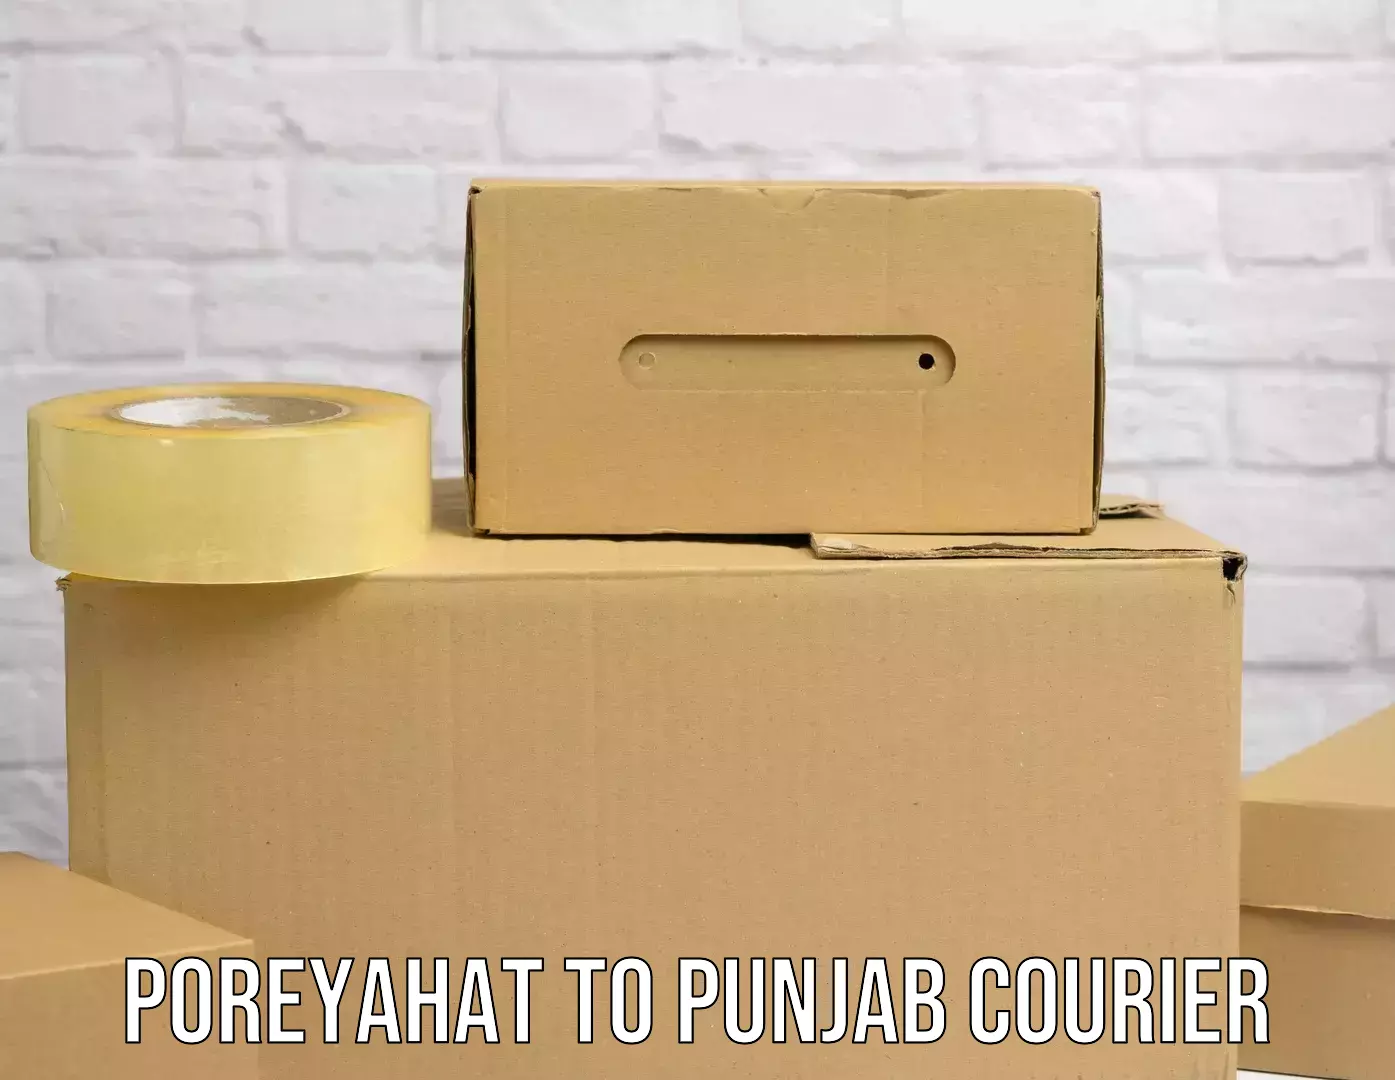 Modern delivery methods Poreyahat to Dhilwan